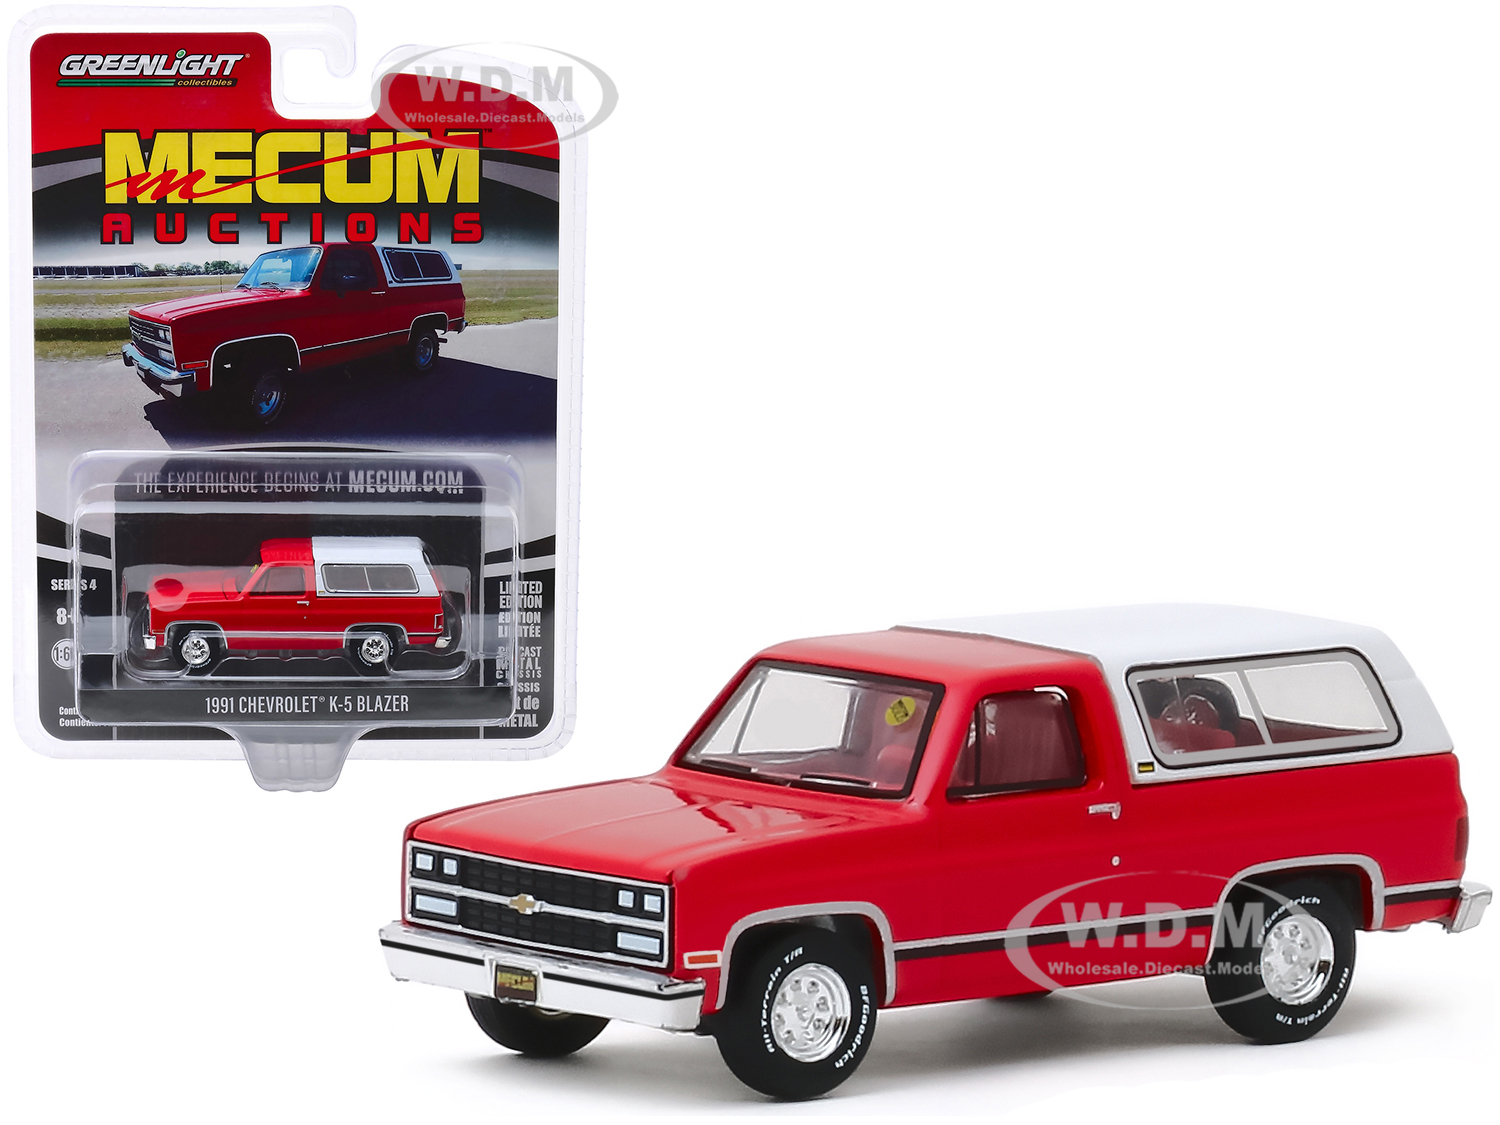 1991 Chevrolet K-5 Blazer Red And White With Red Interior (houston 2019) "mecum Auctions Collector Cars" Series 4 1/64 Diecast Model Car By Greenligh